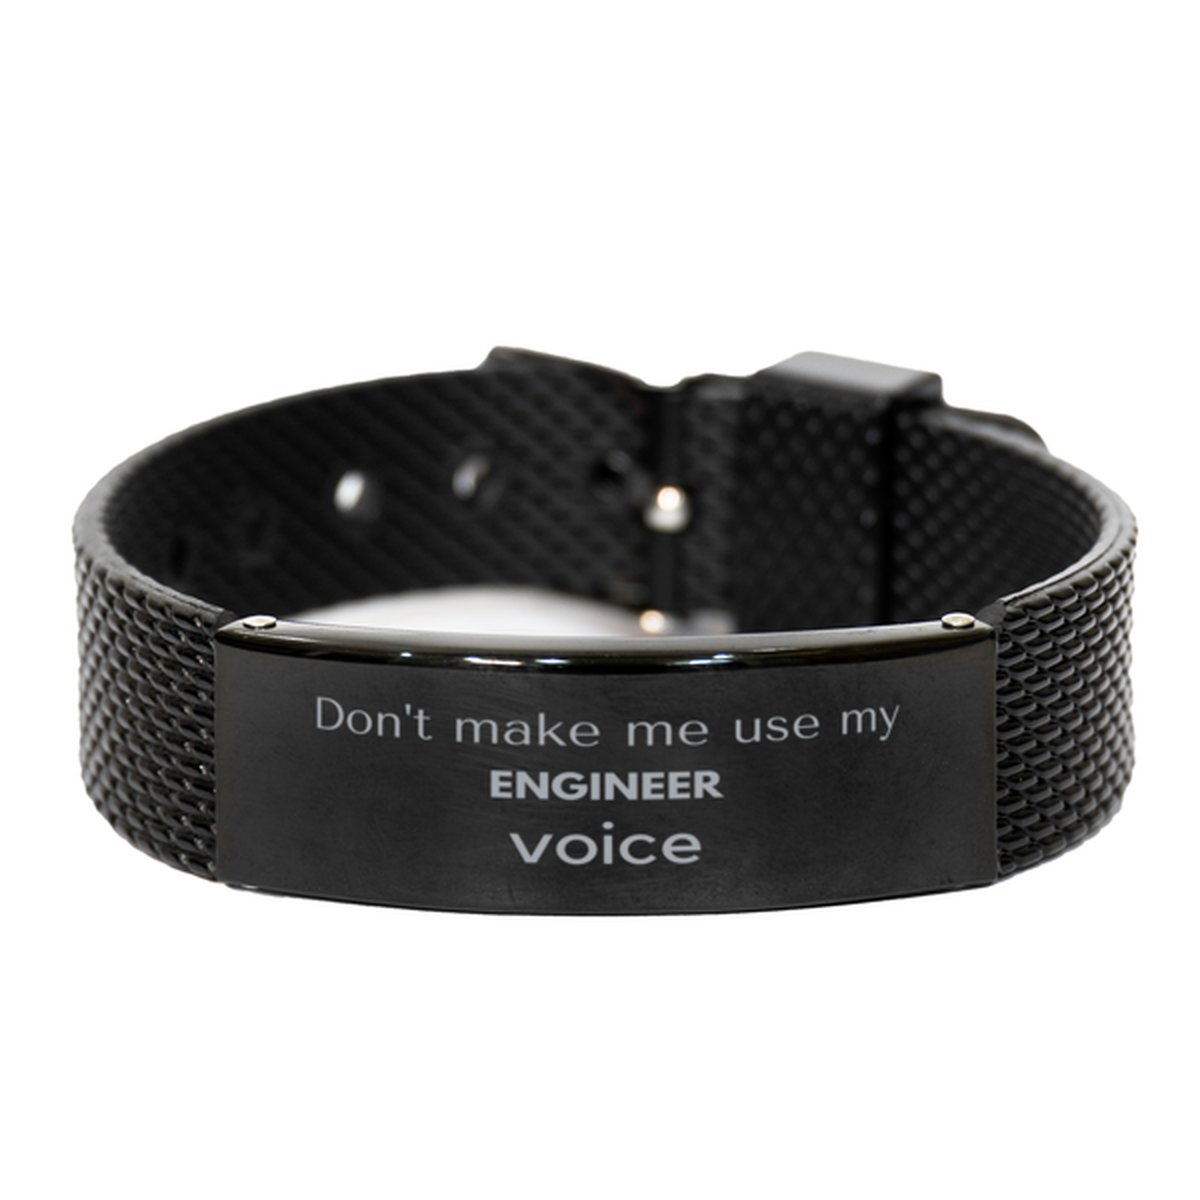 Don't make me use my Engineer voice, Sarcasm Engineer Gifts, Christmas Engineer Black Shark Mesh Bracelet Birthday Unique Gifts For Engineer Coworkers, Men, Women, Colleague, Friends